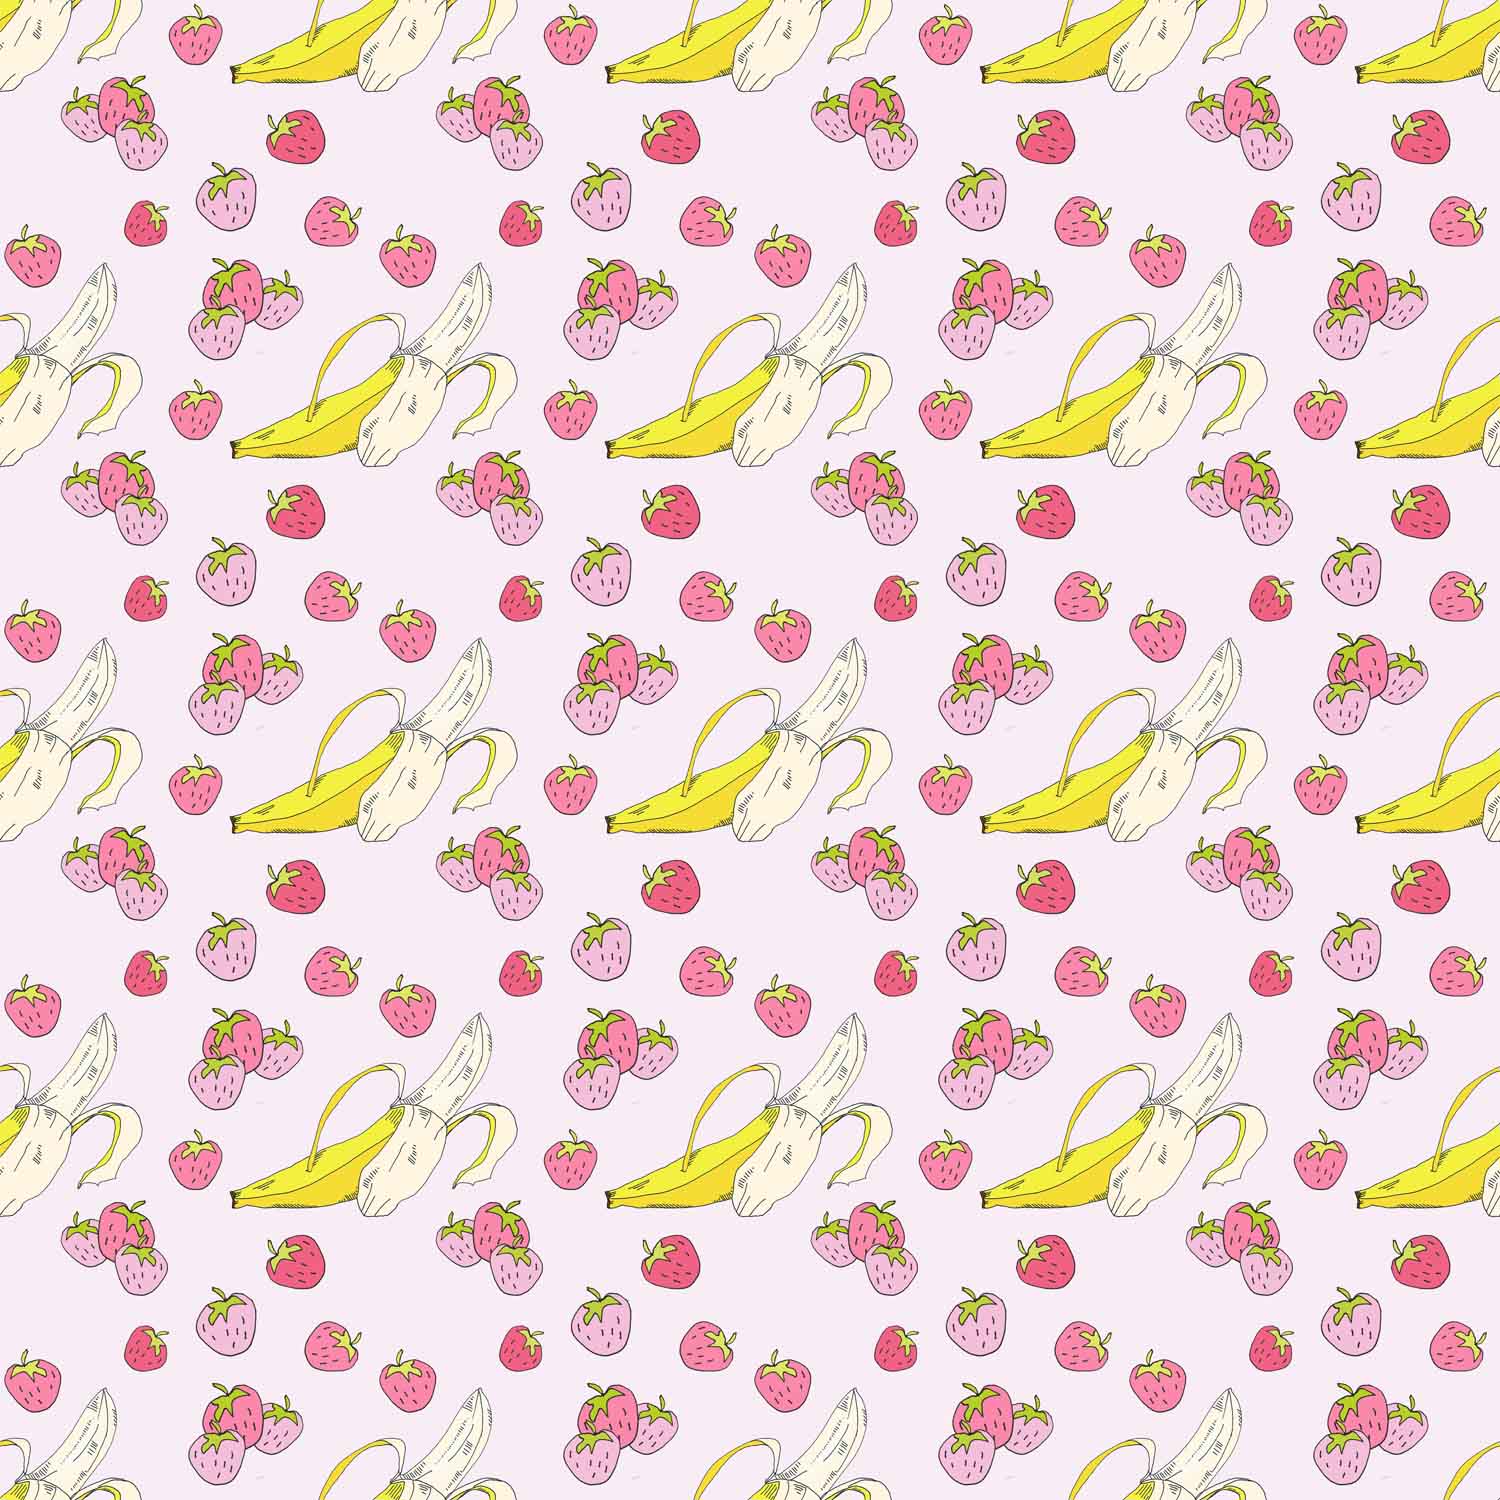 art every day number 519 bananas berries pattern illustration janet bright